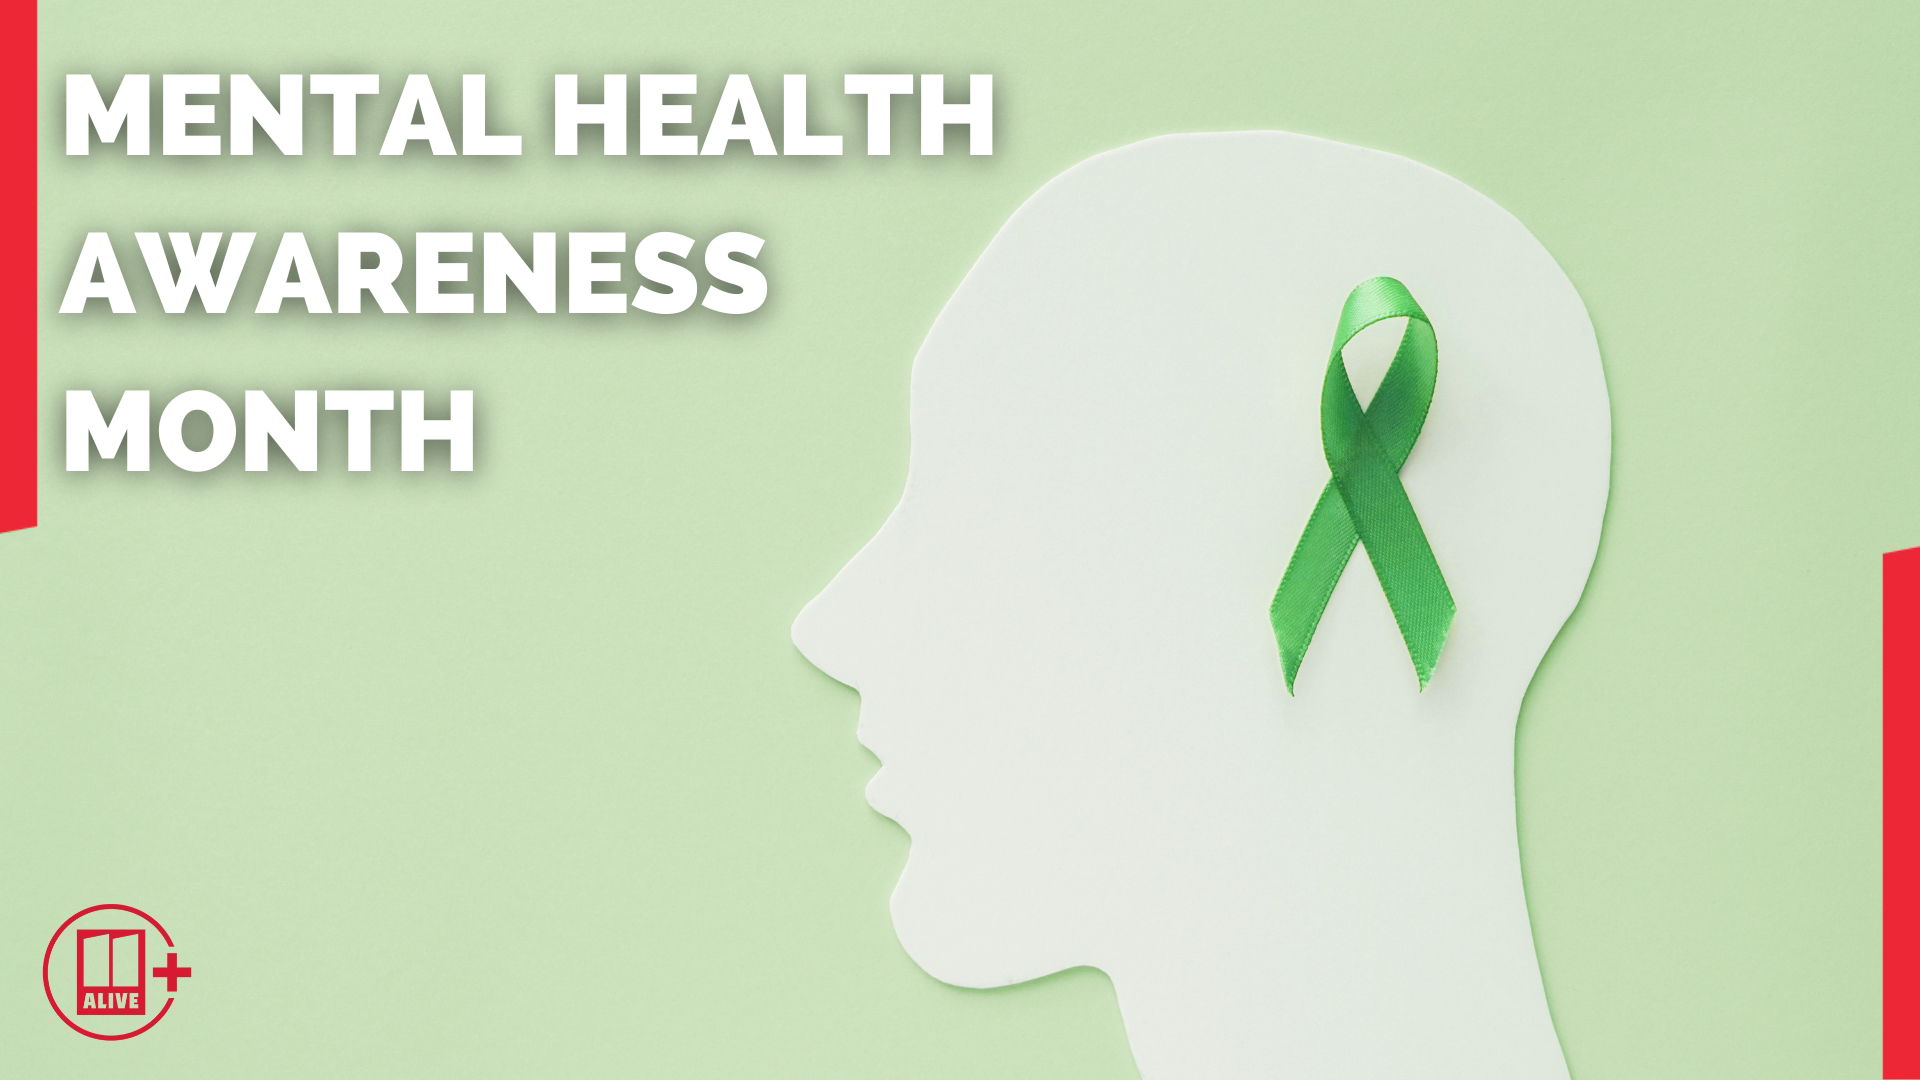 May is Mental Health Awareness Month. 11Alive is working to raise awareness about trauma and the impact it can have on the physical, emotional, and mental health.